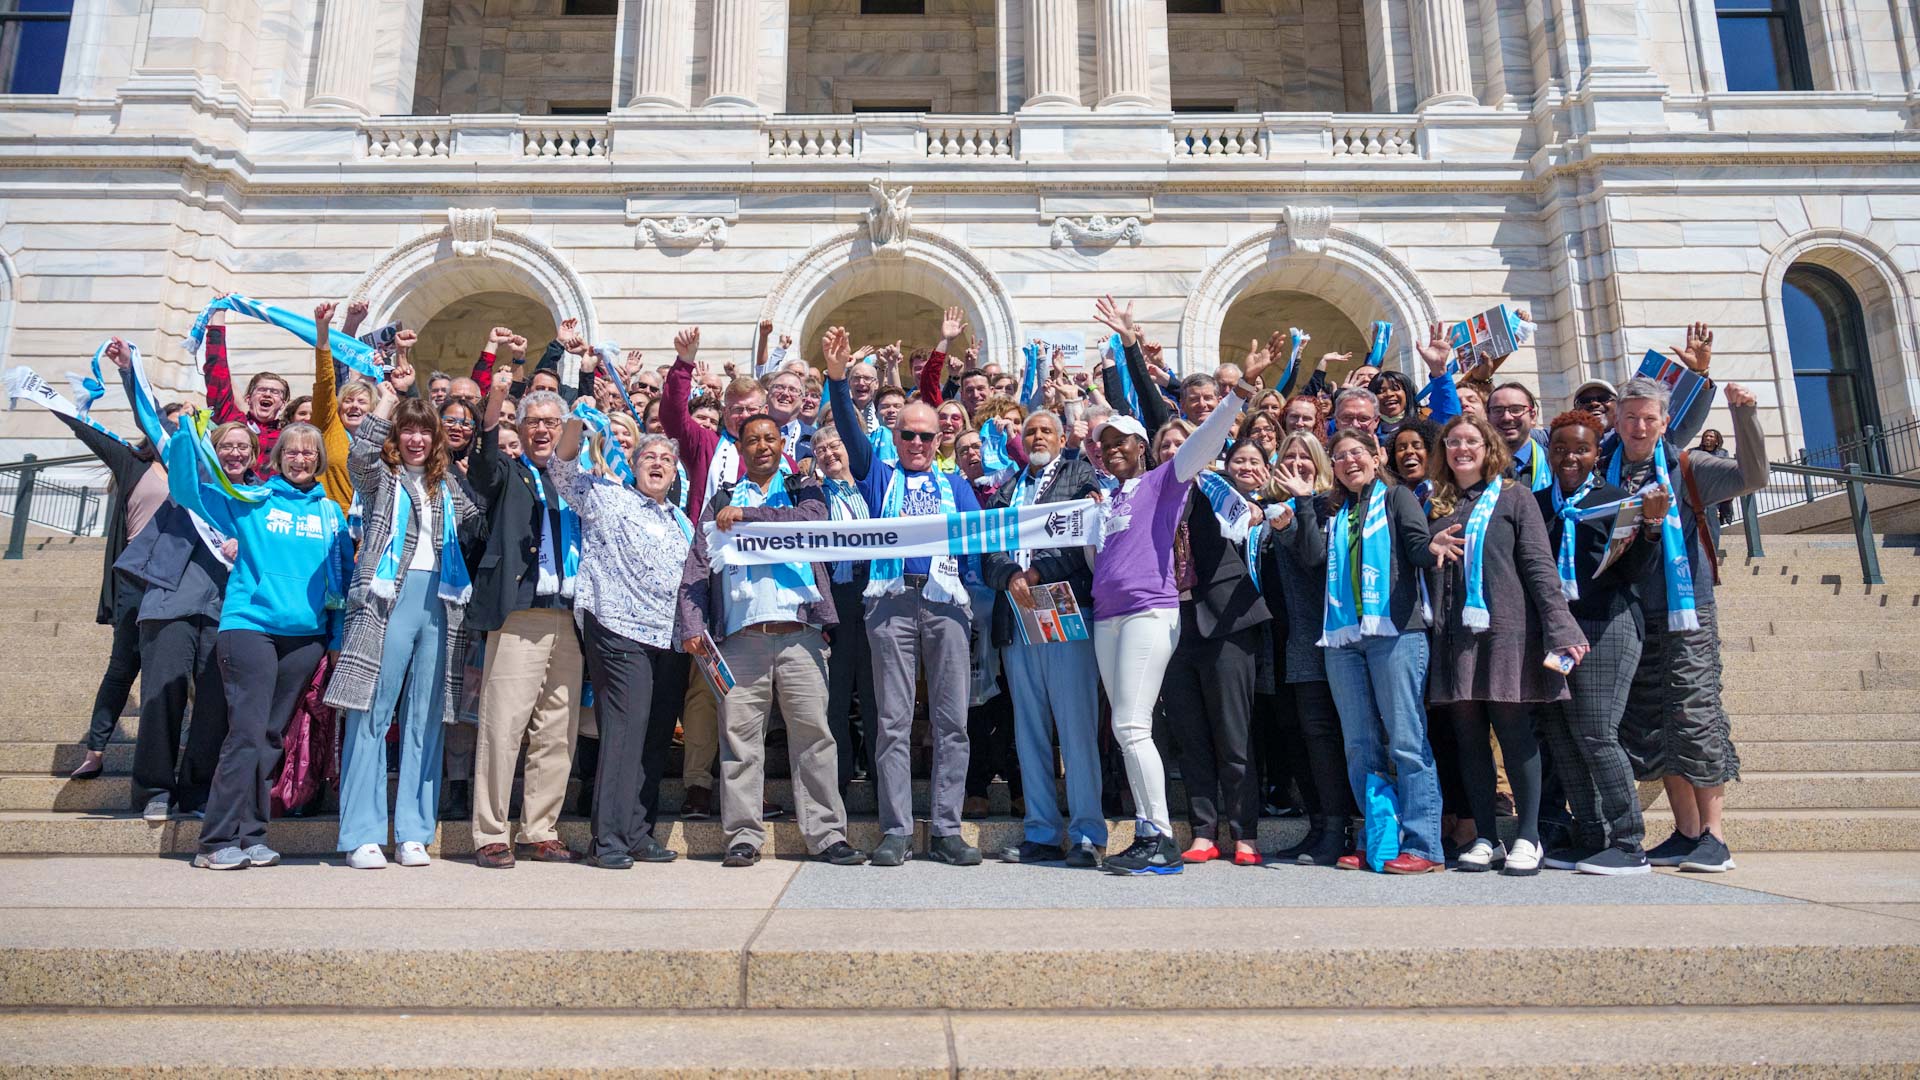 Habitat for Humanity advocates on the front steps of the Minnesota Capitol